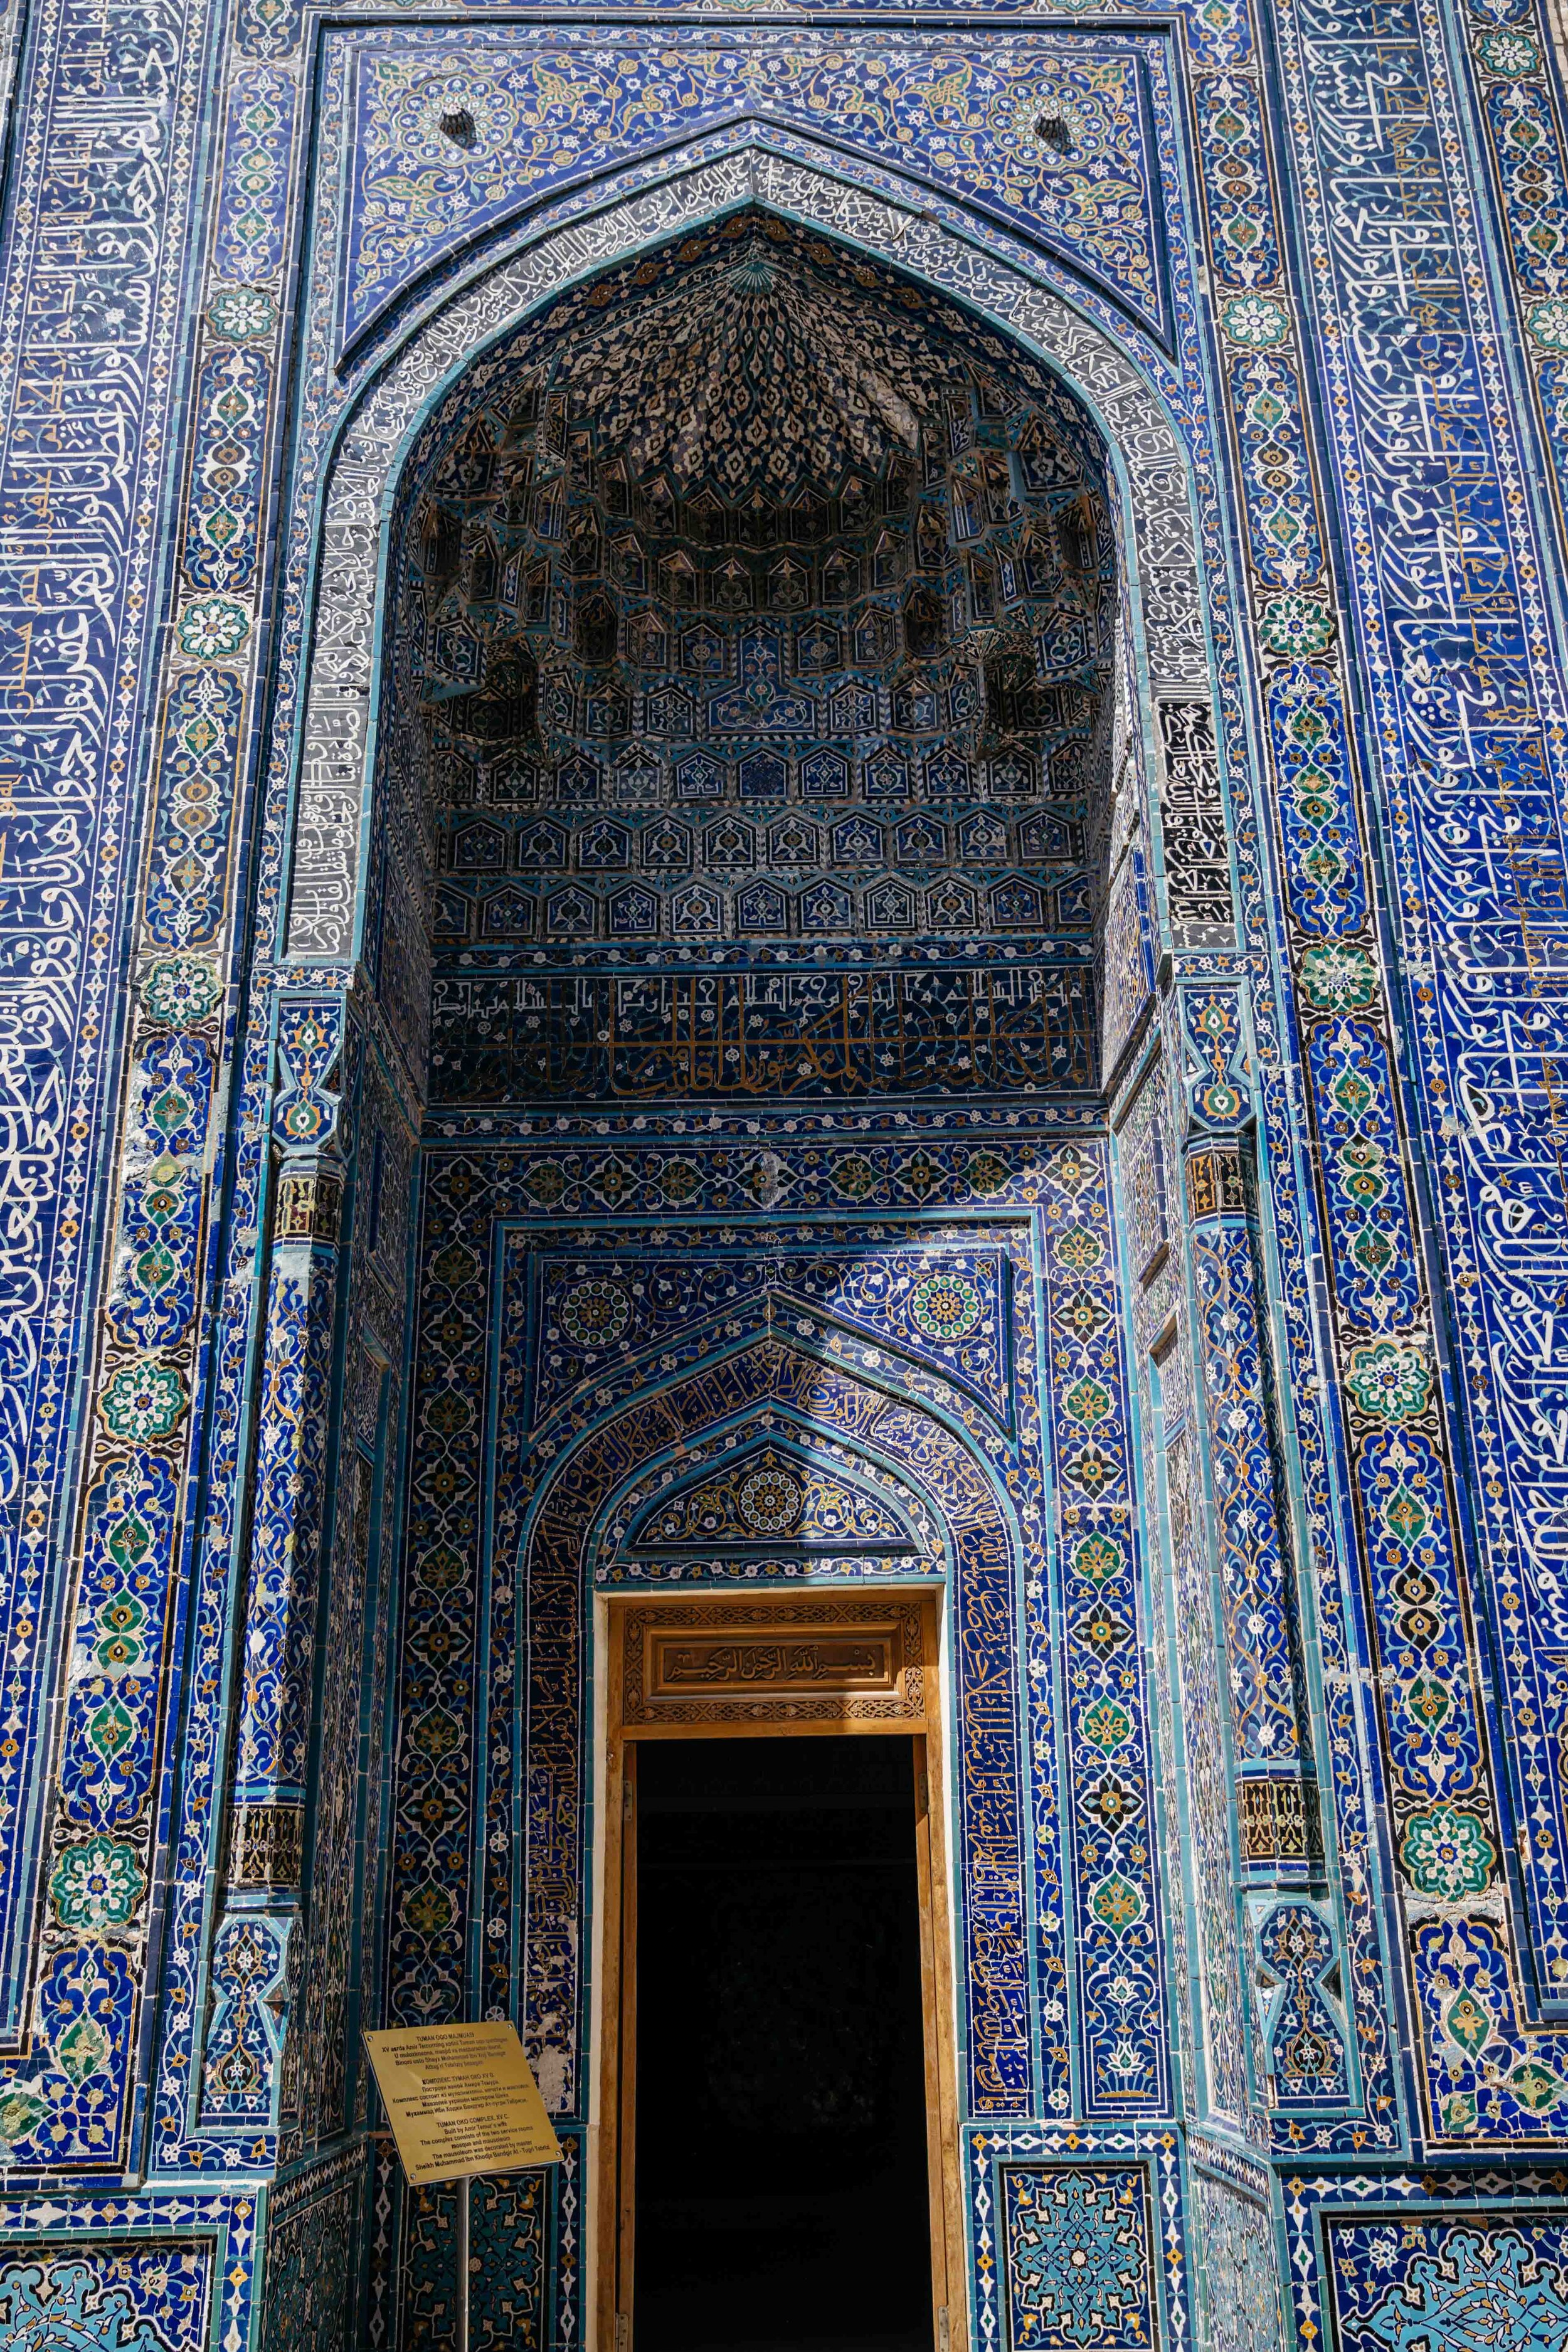  Tile details from the Shah-i-Zinda tomb complex 